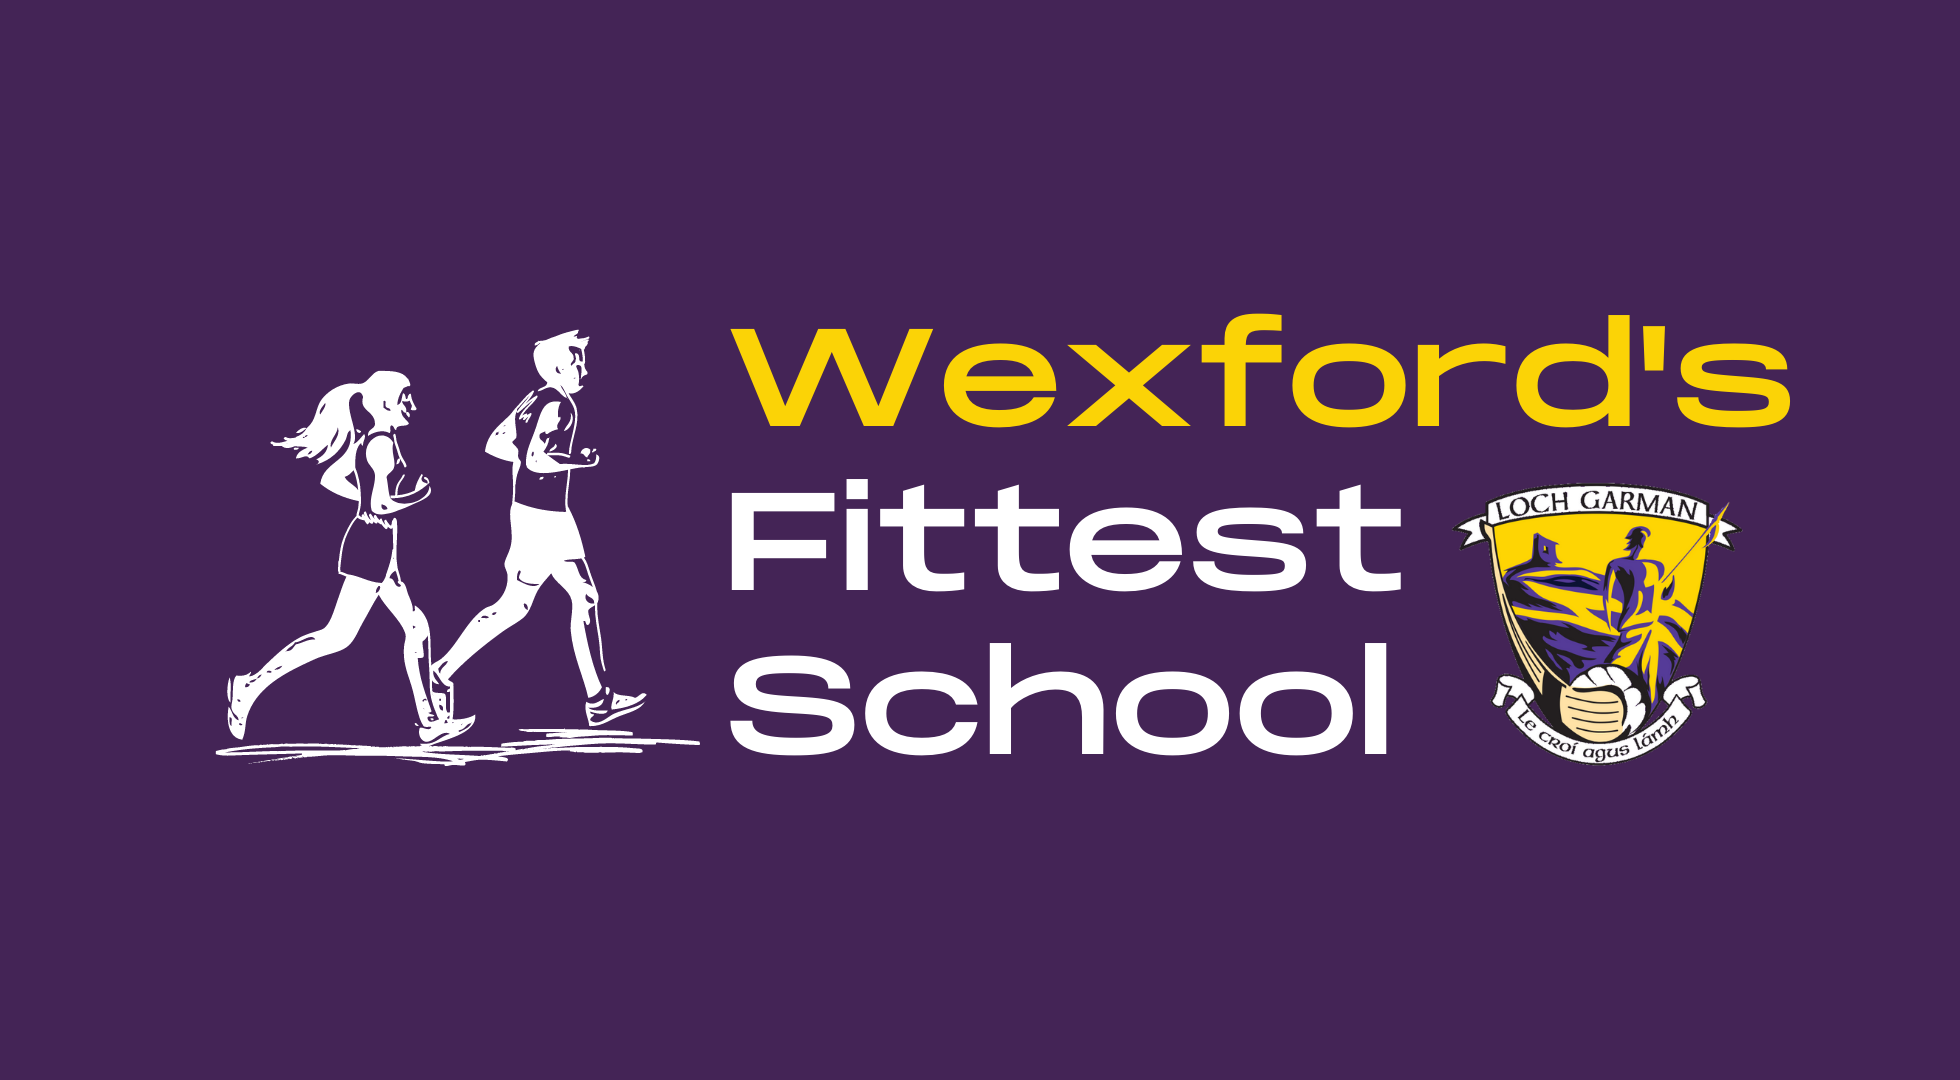 Wexford’s Fittest School